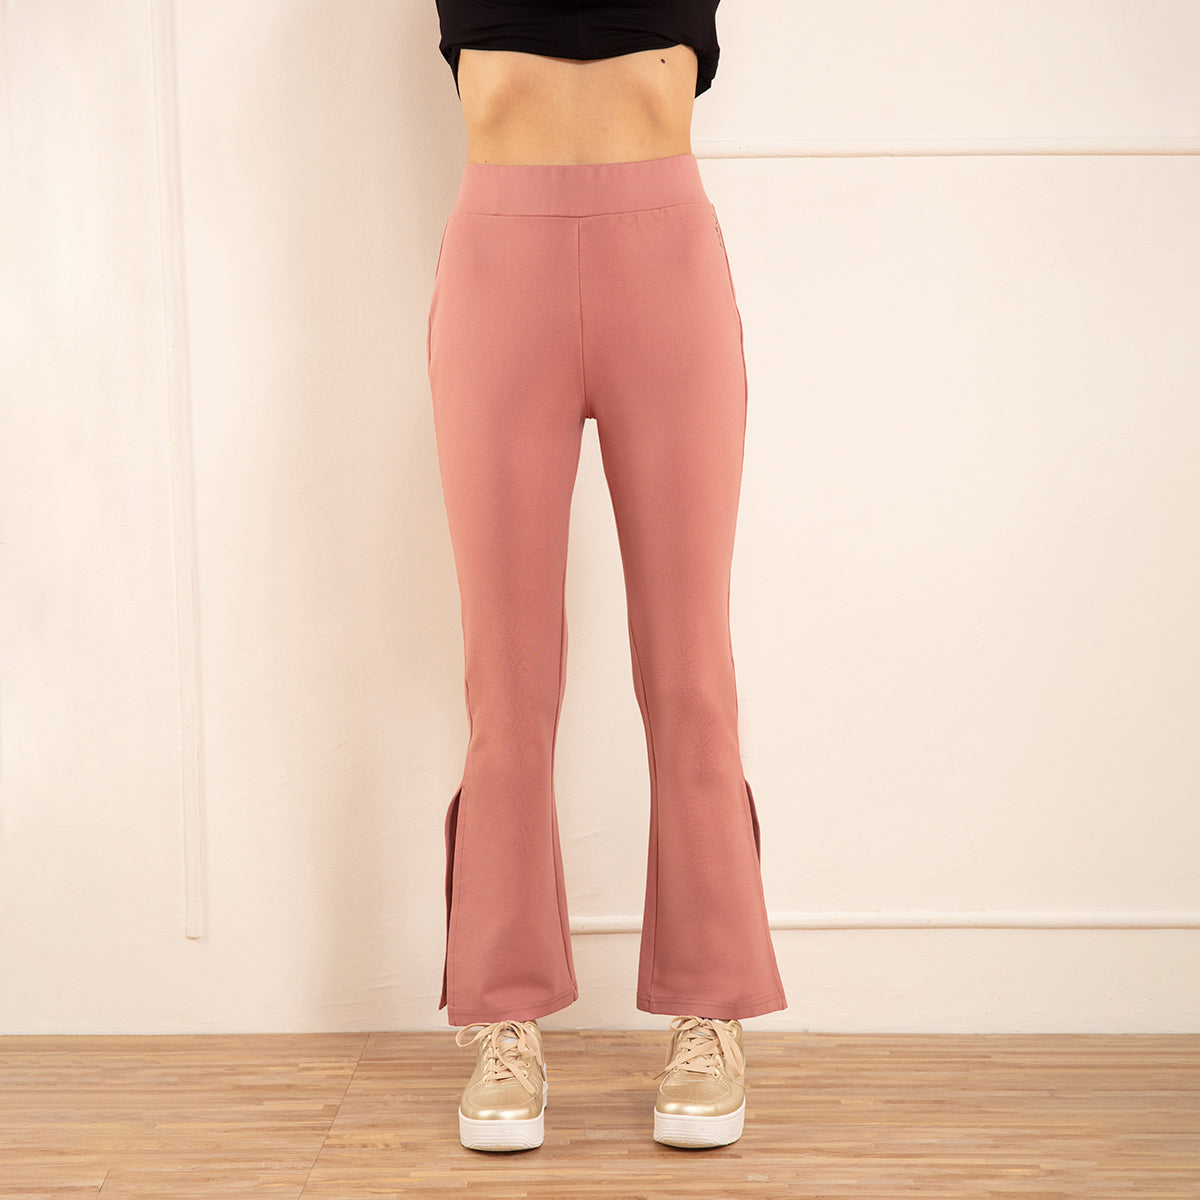 Nykd All Day High Waisted Flared Pants- NYAT234 Dusty Rose